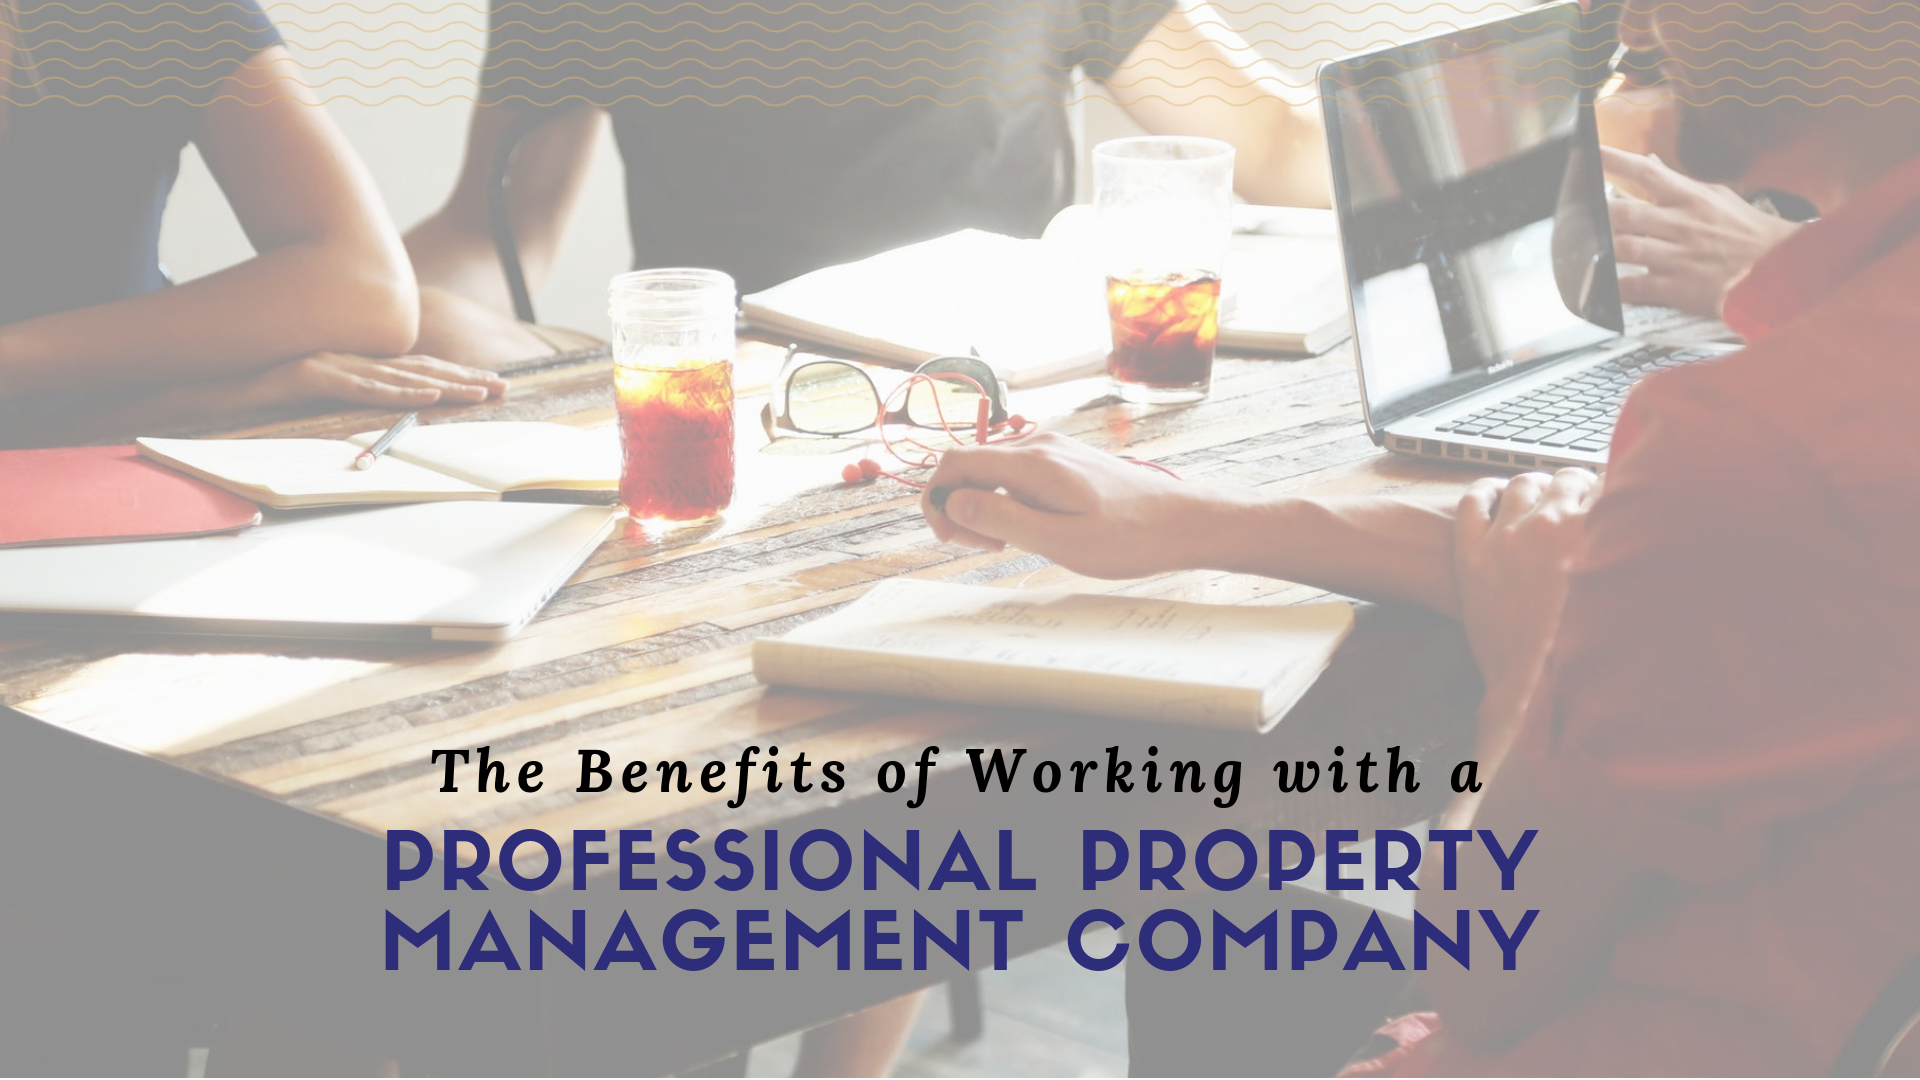 The Benefits of Working with a Professional Property Management Company